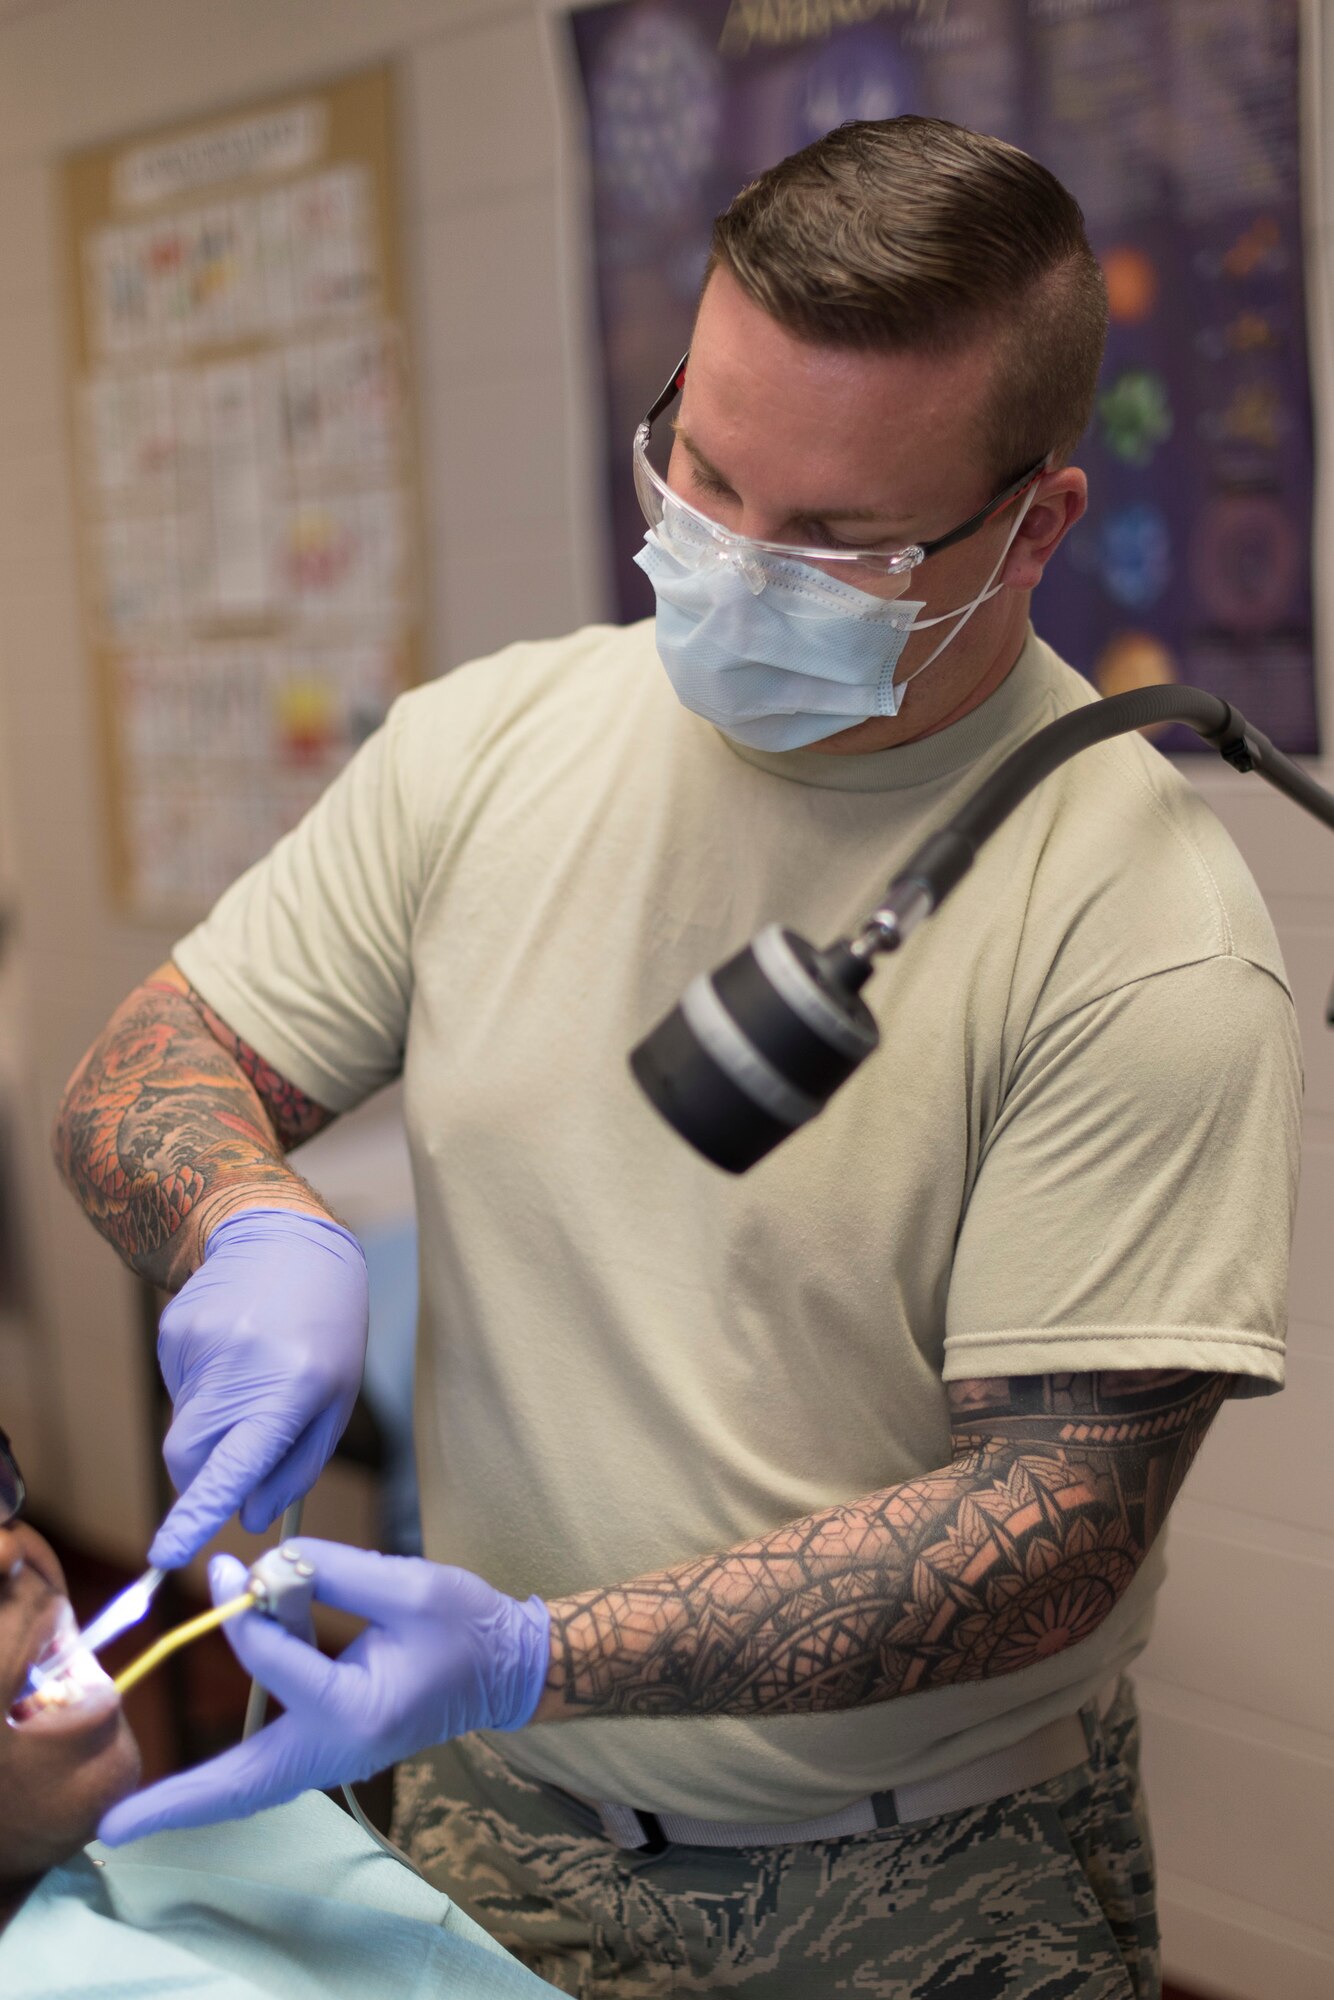 Staff Sgt. Reagin, an Air National Guard medic from the 187th Fighter Wing CERFP in Montgomery, Ala., performs dental work during the Alabama Wellness Innovative Readiness Training (IRT) June 2, 2018 at Thomasville High School in Thomasville, Ala. Air Guardsmen from Alabama and Wisconsin were part of the joint force participating in the two-week training that provided no-cost health care to the citizens of lower Alabama. (US Air National Guard photo by Staff Sgt. Jared Rand).